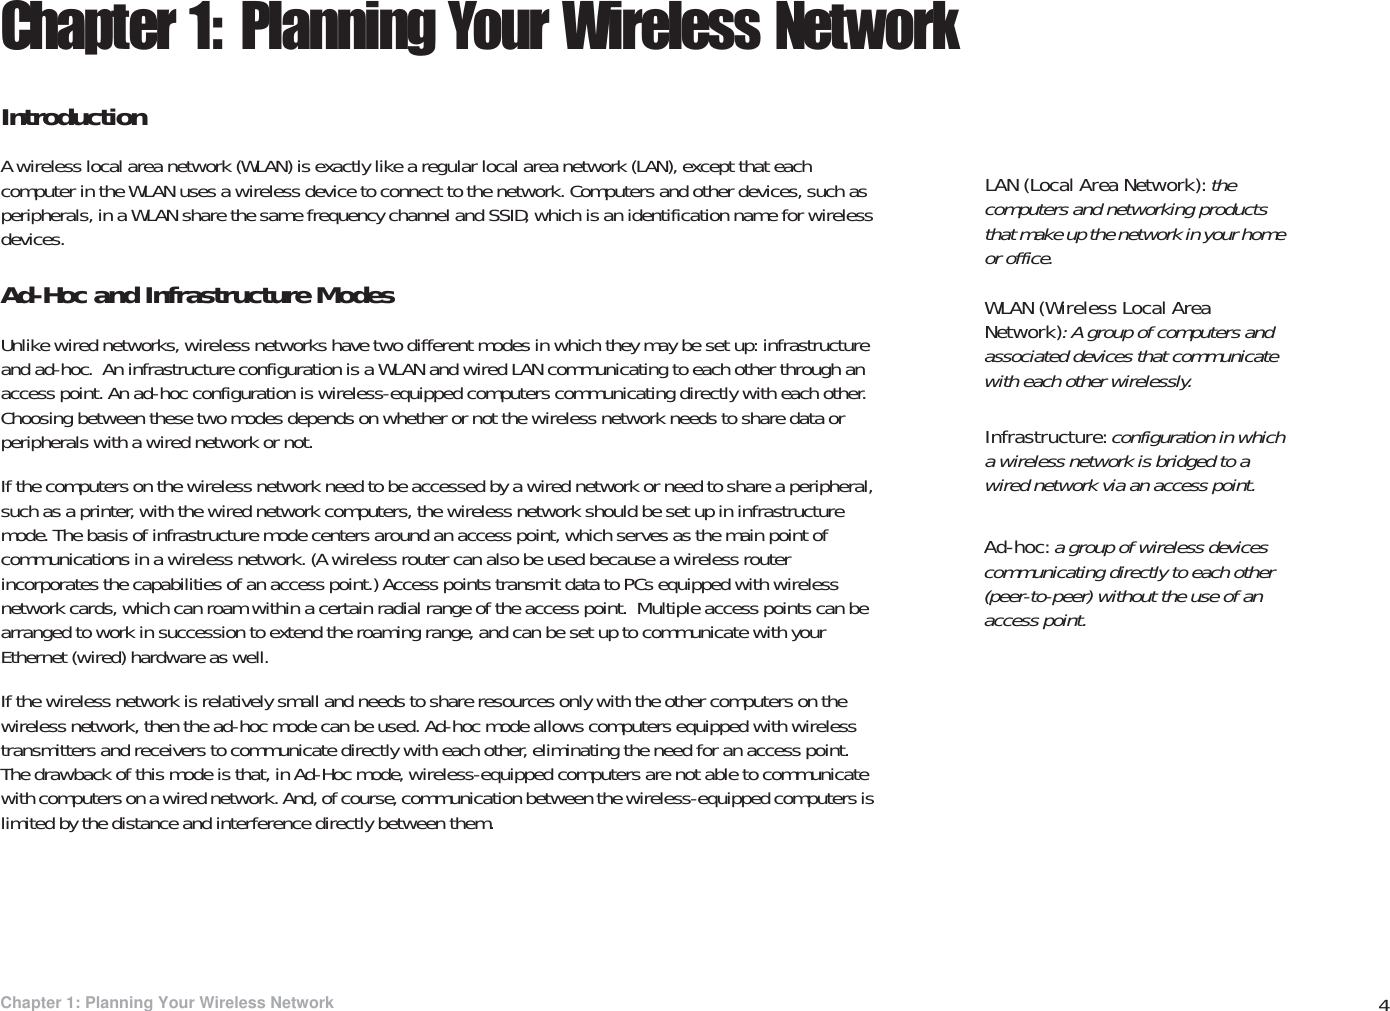 4Chapter 1: Planning Your Wireless NetworkIntroductionWireless-G PTZ Internet Video Camera with AudioChapter 1: Planning Your Wireless NetworkIntroductionA wireless local area network (WLAN) is exactly like a regular local area network (LAN), except that each computer in the WLAN uses a wireless device to connect to the network. Computers and other devices, such as peripherals, in a WLAN share the same frequency channel and SSID, which is an identification name for wireless devices.Ad-Hoc and Infrastructure ModesUnlike wired networks, wireless networks have two different modes in which they may be set up: infrastructure and ad-hoc.  An infrastructure configuration is a WLAN and wired LAN communicating to each other through an access point. An ad-hoc configuration is wireless-equipped computers communicating directly with each other. Choosing between these two modes depends on whether or not the wireless network needs to share data or peripherals with a wired network or not.If the computers on the wireless network need to be accessed by a wired network or need to share a peripheral, such as a printer, with the wired network computers, the wireless network should be set up in infrastructure mode. The basis of infrastructure mode centers around an access point, which serves as the main point of communications in a wireless network. (A wireless router can also be used because a wireless router incorporates the capabilities of an access point.) Access points transmit data to PCs equipped with wireless network cards, which can roam within a certain radial range of the access point.  Multiple access points can be arranged to work in succession to extend the roaming range, and can be set up to communicate with your Ethernet (wired) hardware as well.If the wireless network is relatively small and needs to share resources only with the other computers on the wireless network, then the ad-hoc mode can be used. Ad-hoc mode allows computers equipped with wireless transmitters and receivers to communicate directly with each other, eliminating the need for an access point.  The drawback of this mode is that, in Ad-Hoc mode, wireless-equipped computers are not able to communicate with computers on a wired network. And, of course, communication between the wireless-equipped computers is limited by the distance and interference directly between them.Infrastructure: configuration in which a wireless network is bridged to a wired network via an access point.LAN (Local Area Network): the computers and networking products that make up the network in your home or office.Ad-hoc: a group of wireless devices communicating directly to each other (peer-to-peer) without the use of an access point.WLAN (Wireless Local Area Network): A group of computers and associated devices that communicate with each other wirelessly. 